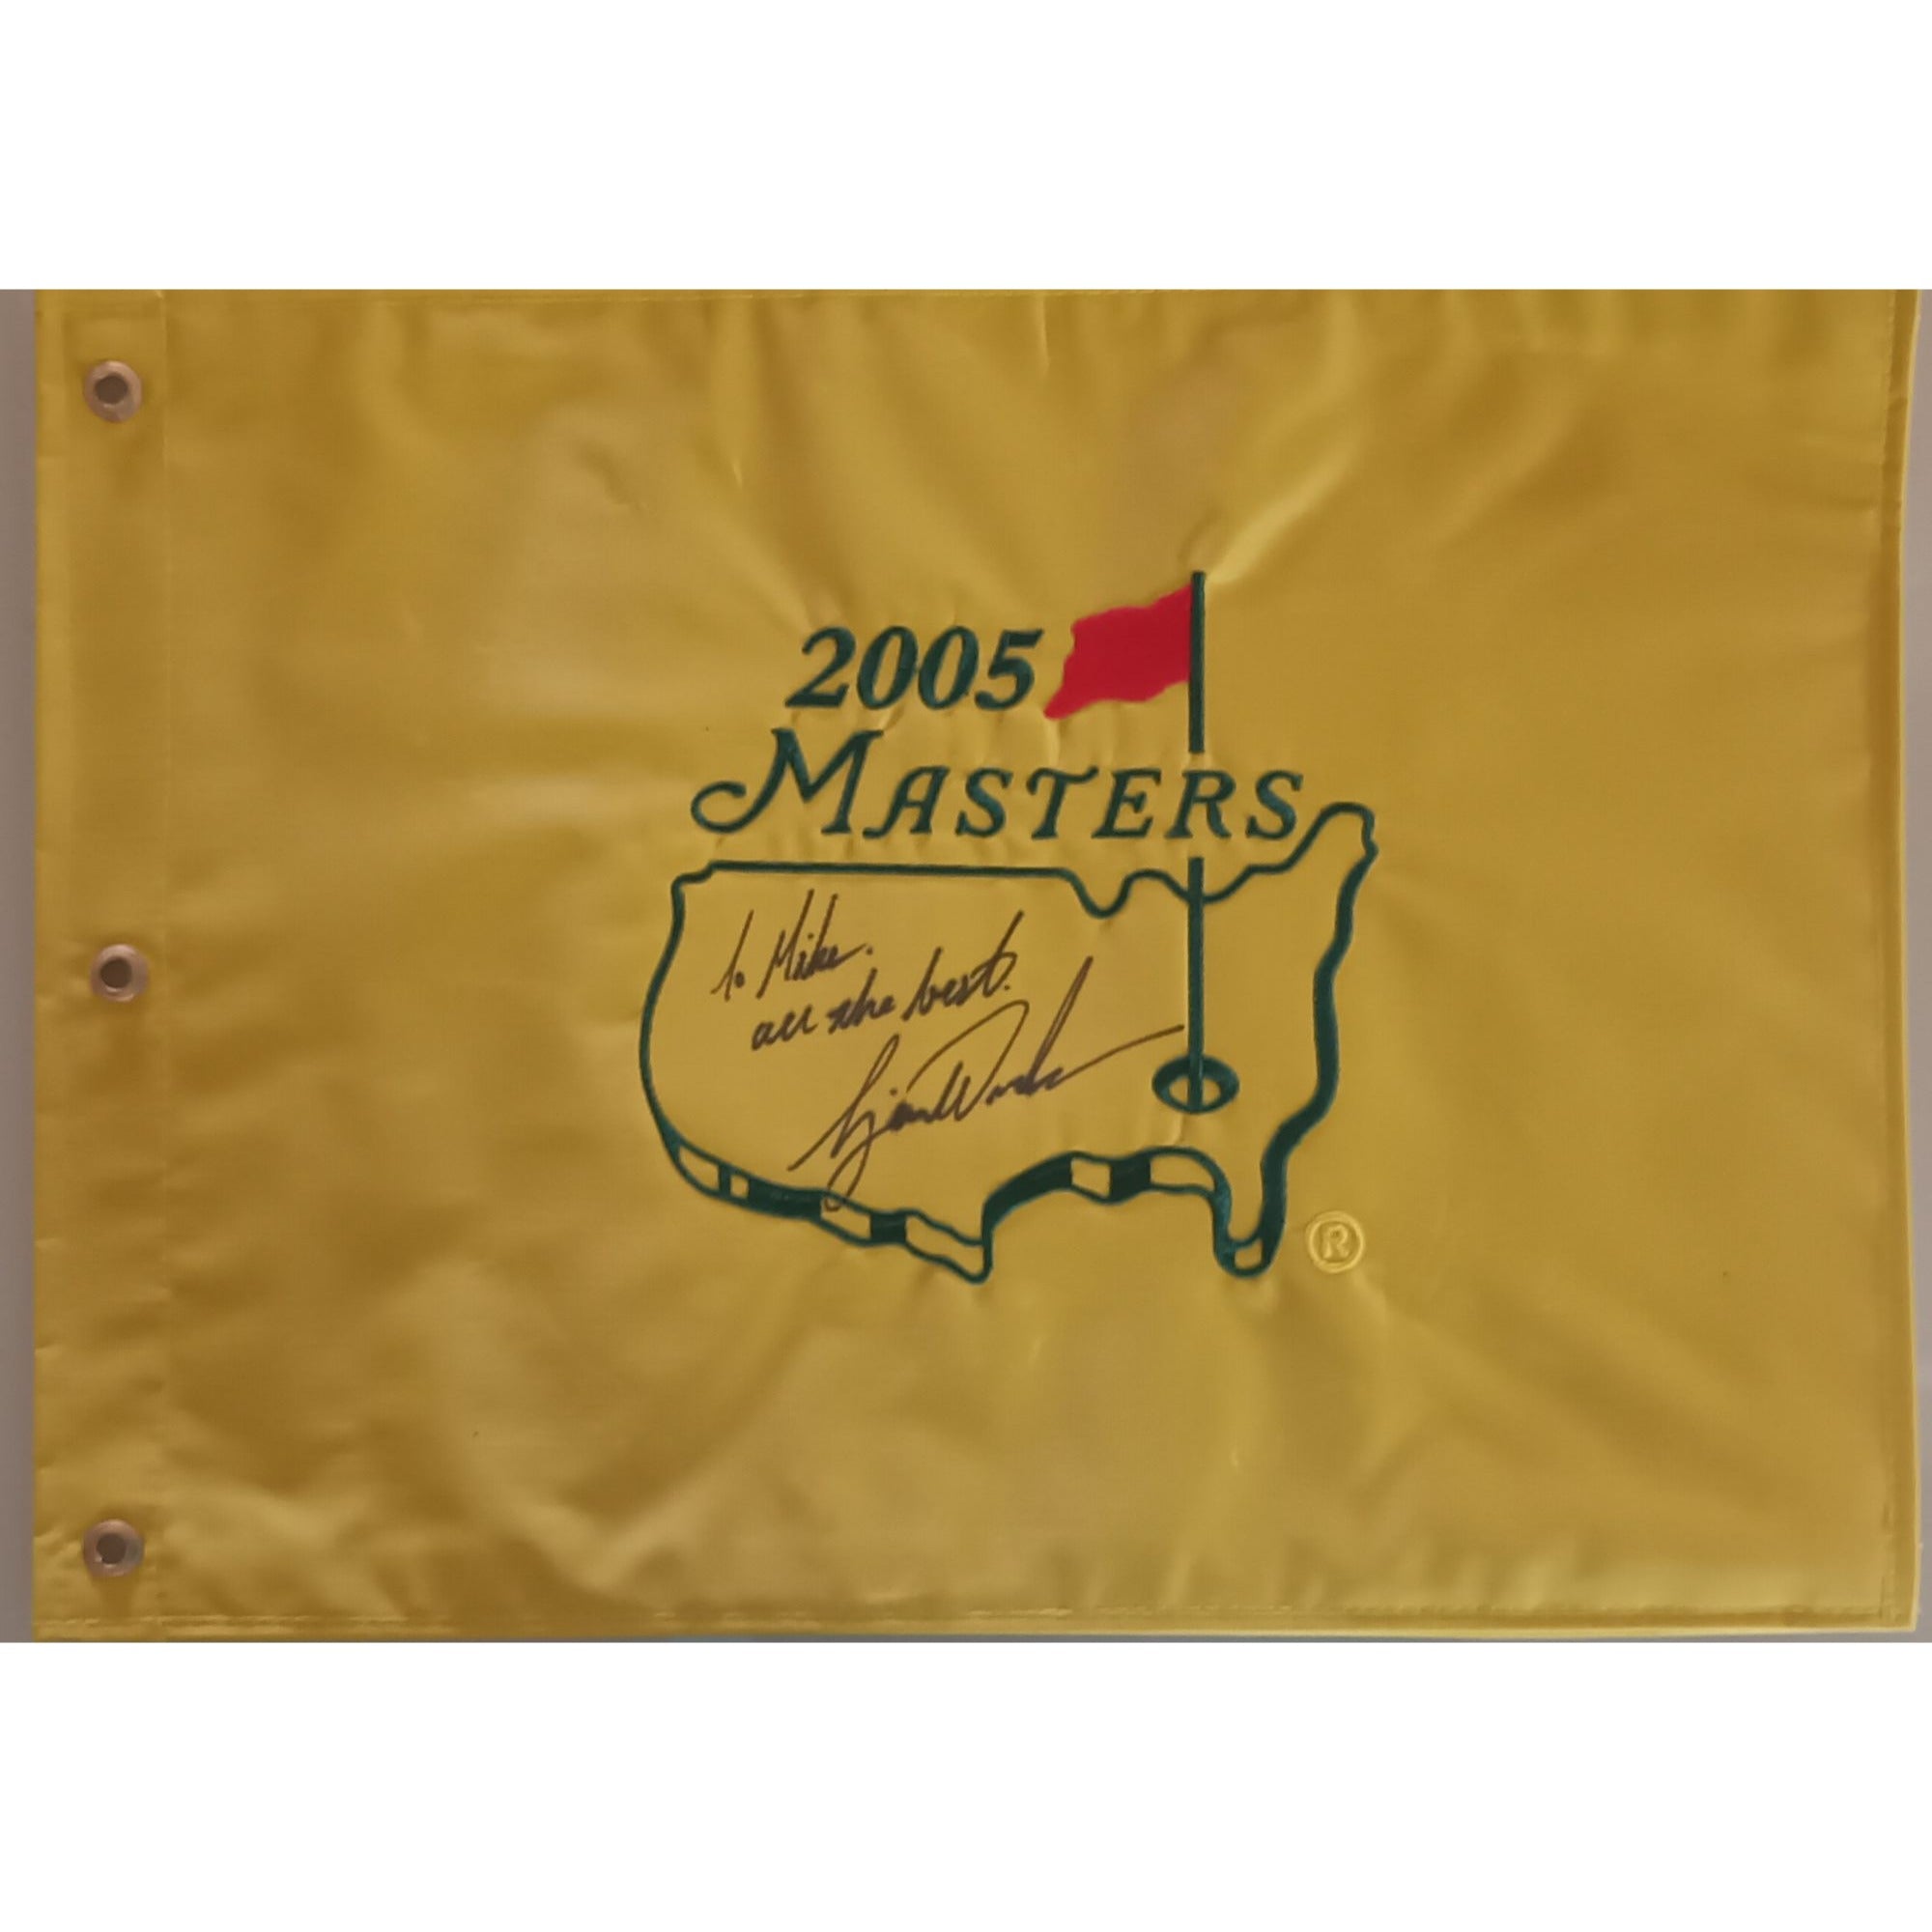 Tiger Woods "To Mike all the best" 2005 Masters Golf pin flag signed with proof